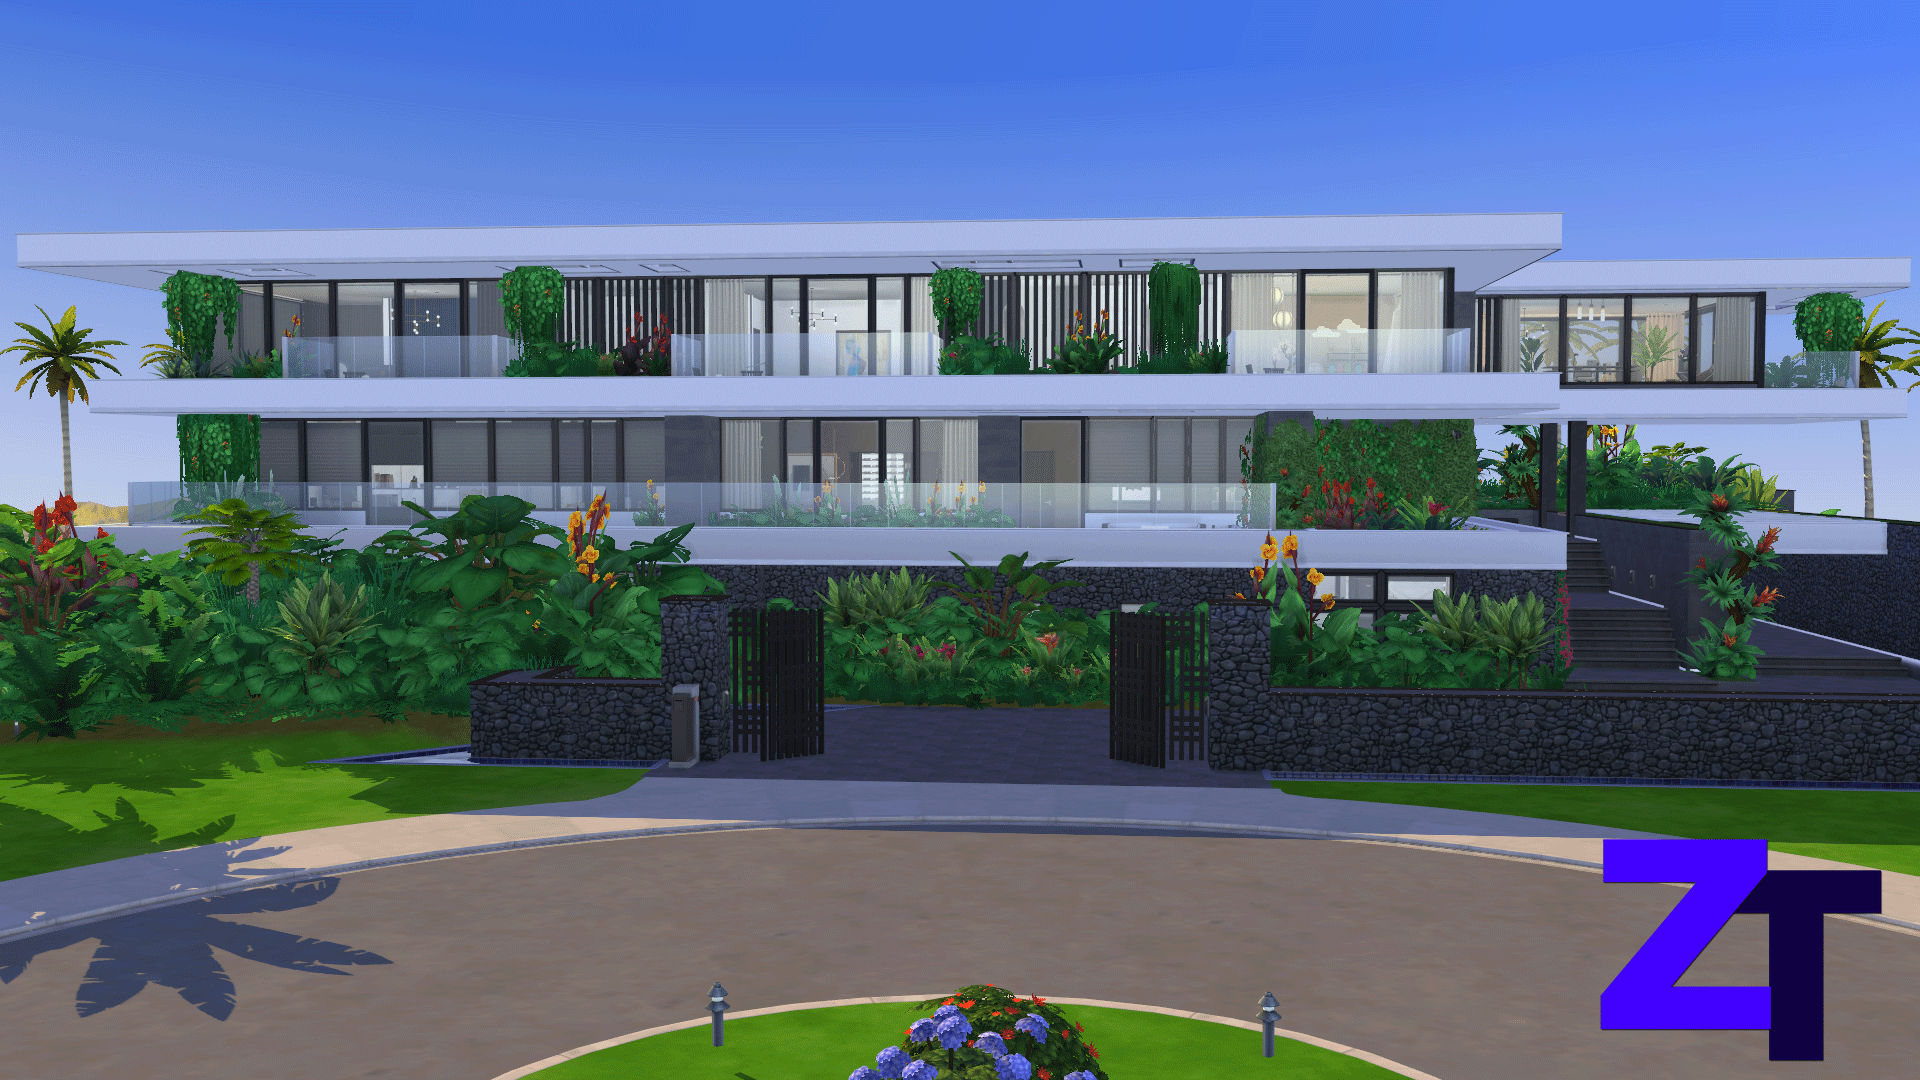 ZT Modern Mansion VII - Screenshots - The Sims 4 Rooms / Lots - CurseForge